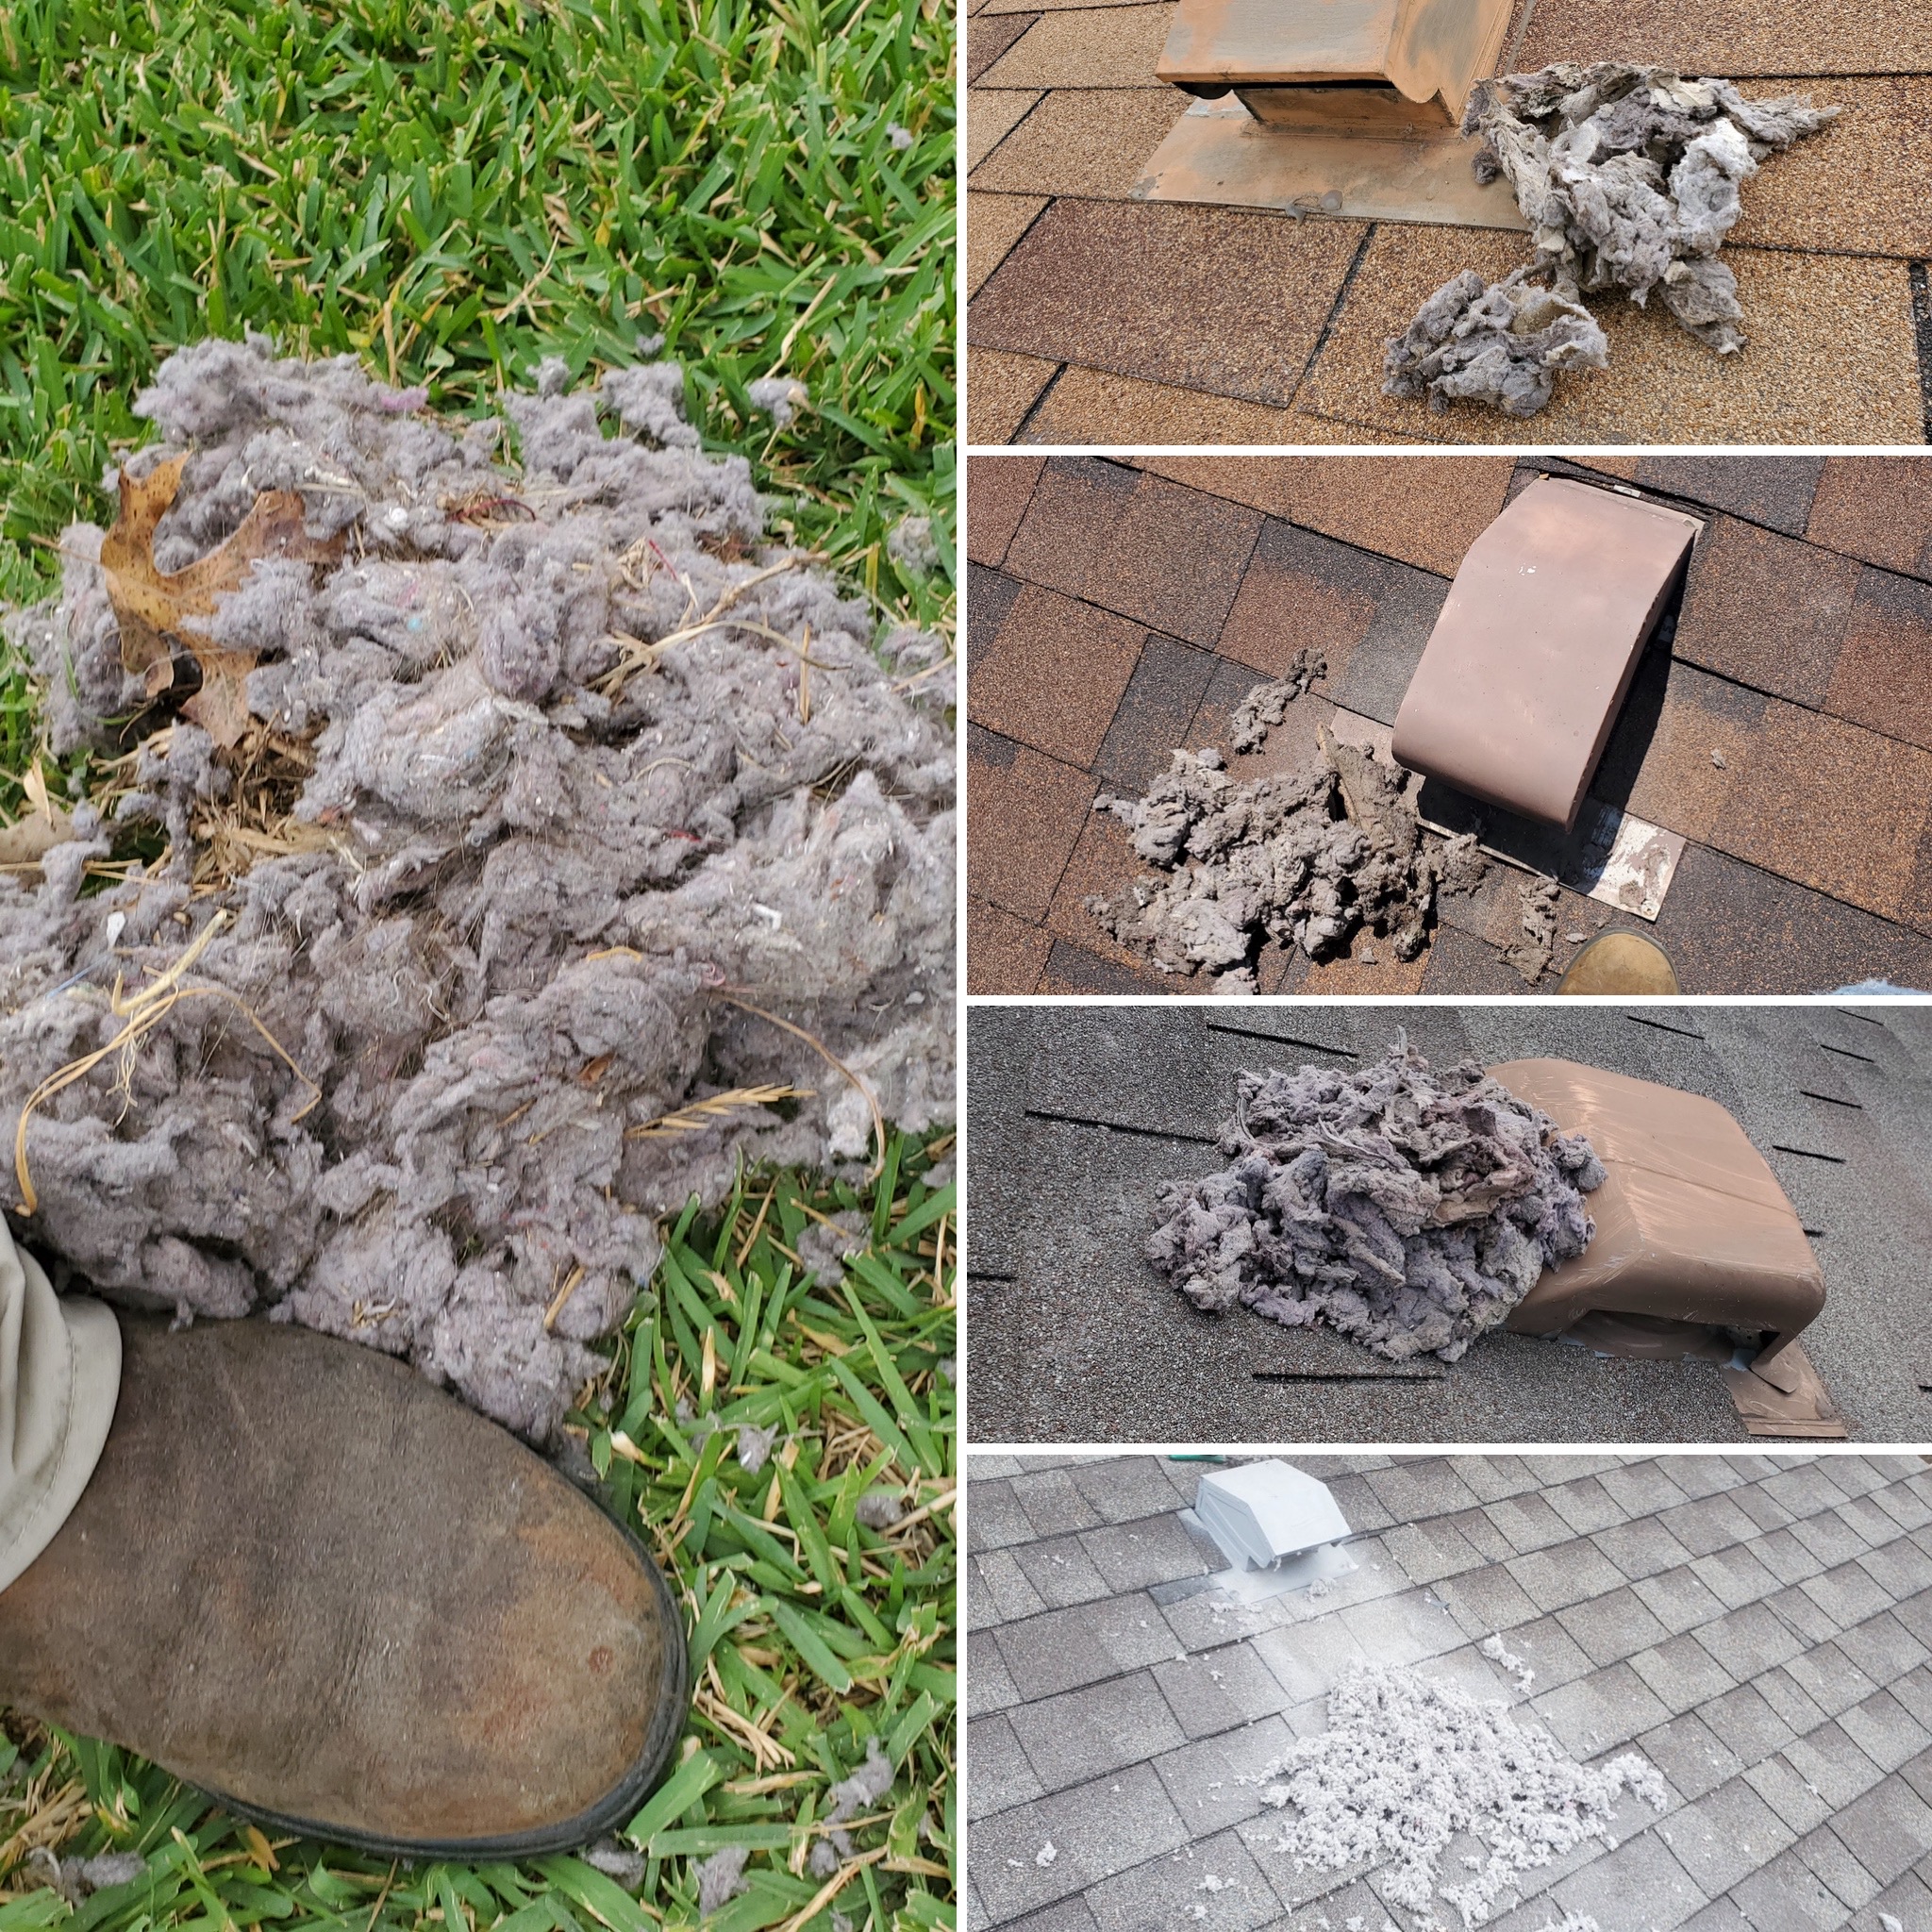 Dryer Vent Lint Buildup Cleaning in Austin, Texas (Image Not Found)